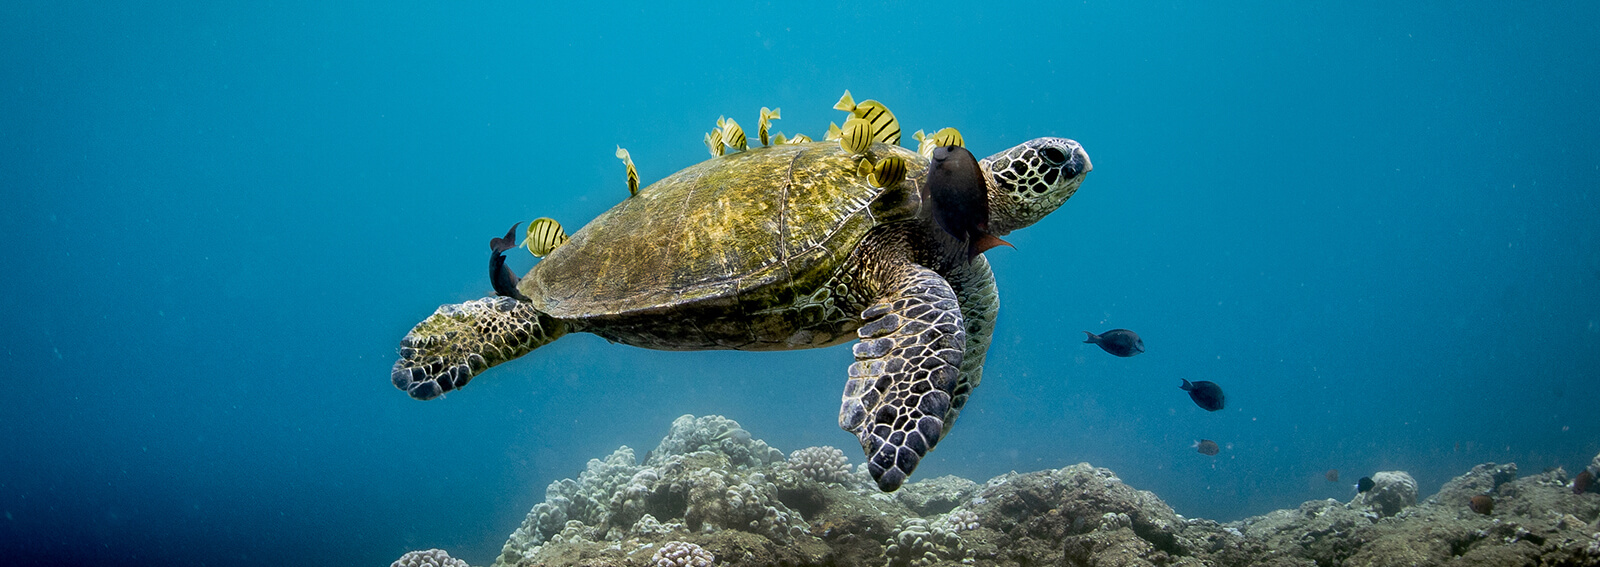 A sea turtle swims with yellow fish clinging to its shell